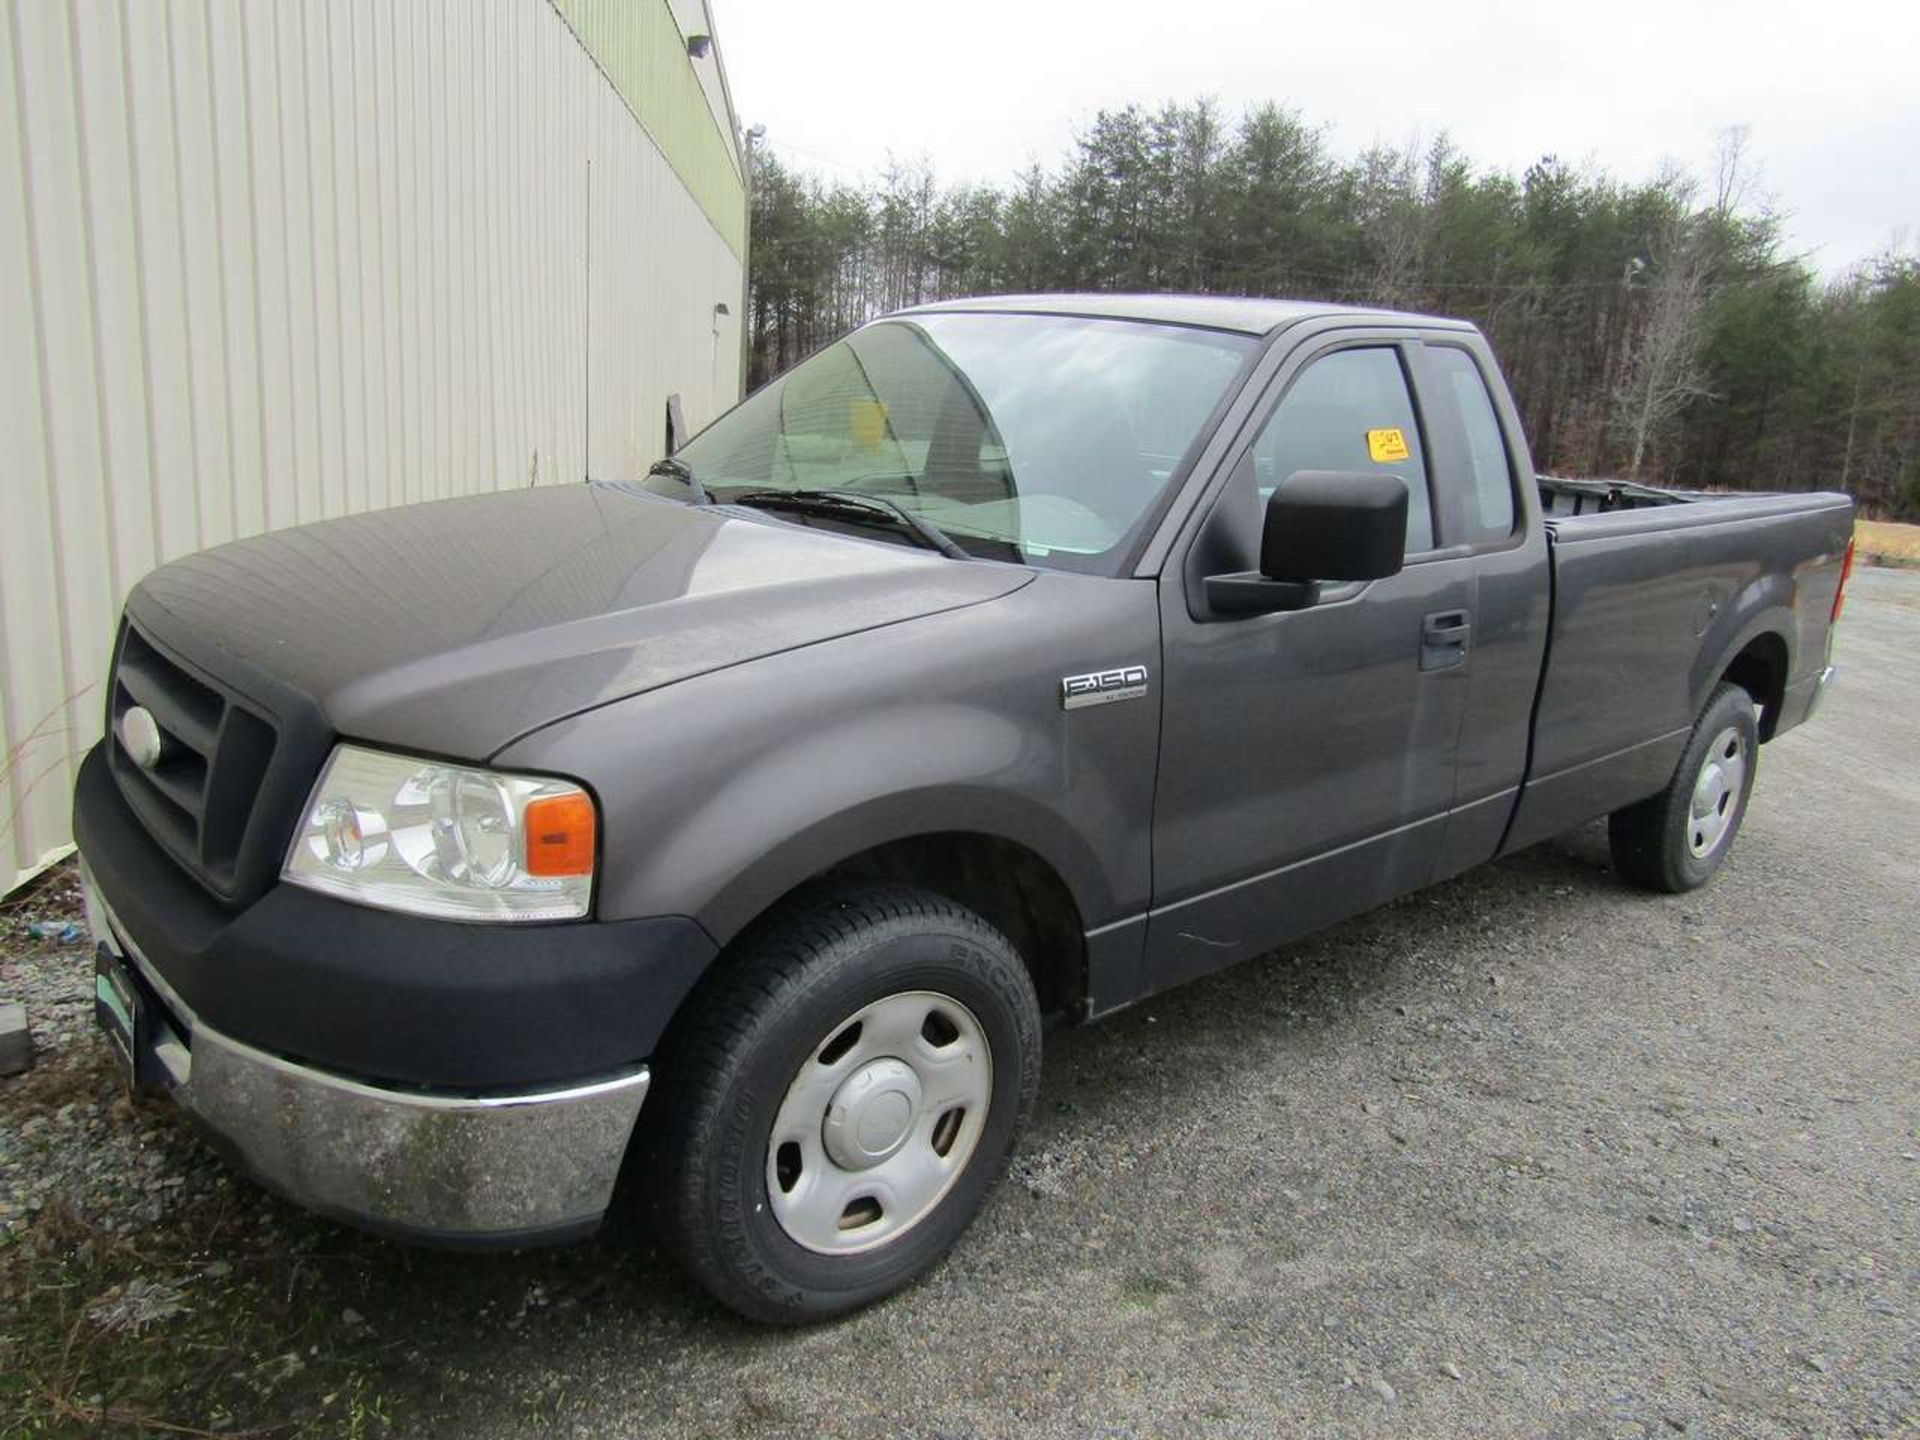 2007 Ford F-150 XL Triton Pick-Up Truck 4.6L V8 Engine, 8' Bed, GVWR 6800 lbs., 108687 Miles, S/N - Image 2 of 7